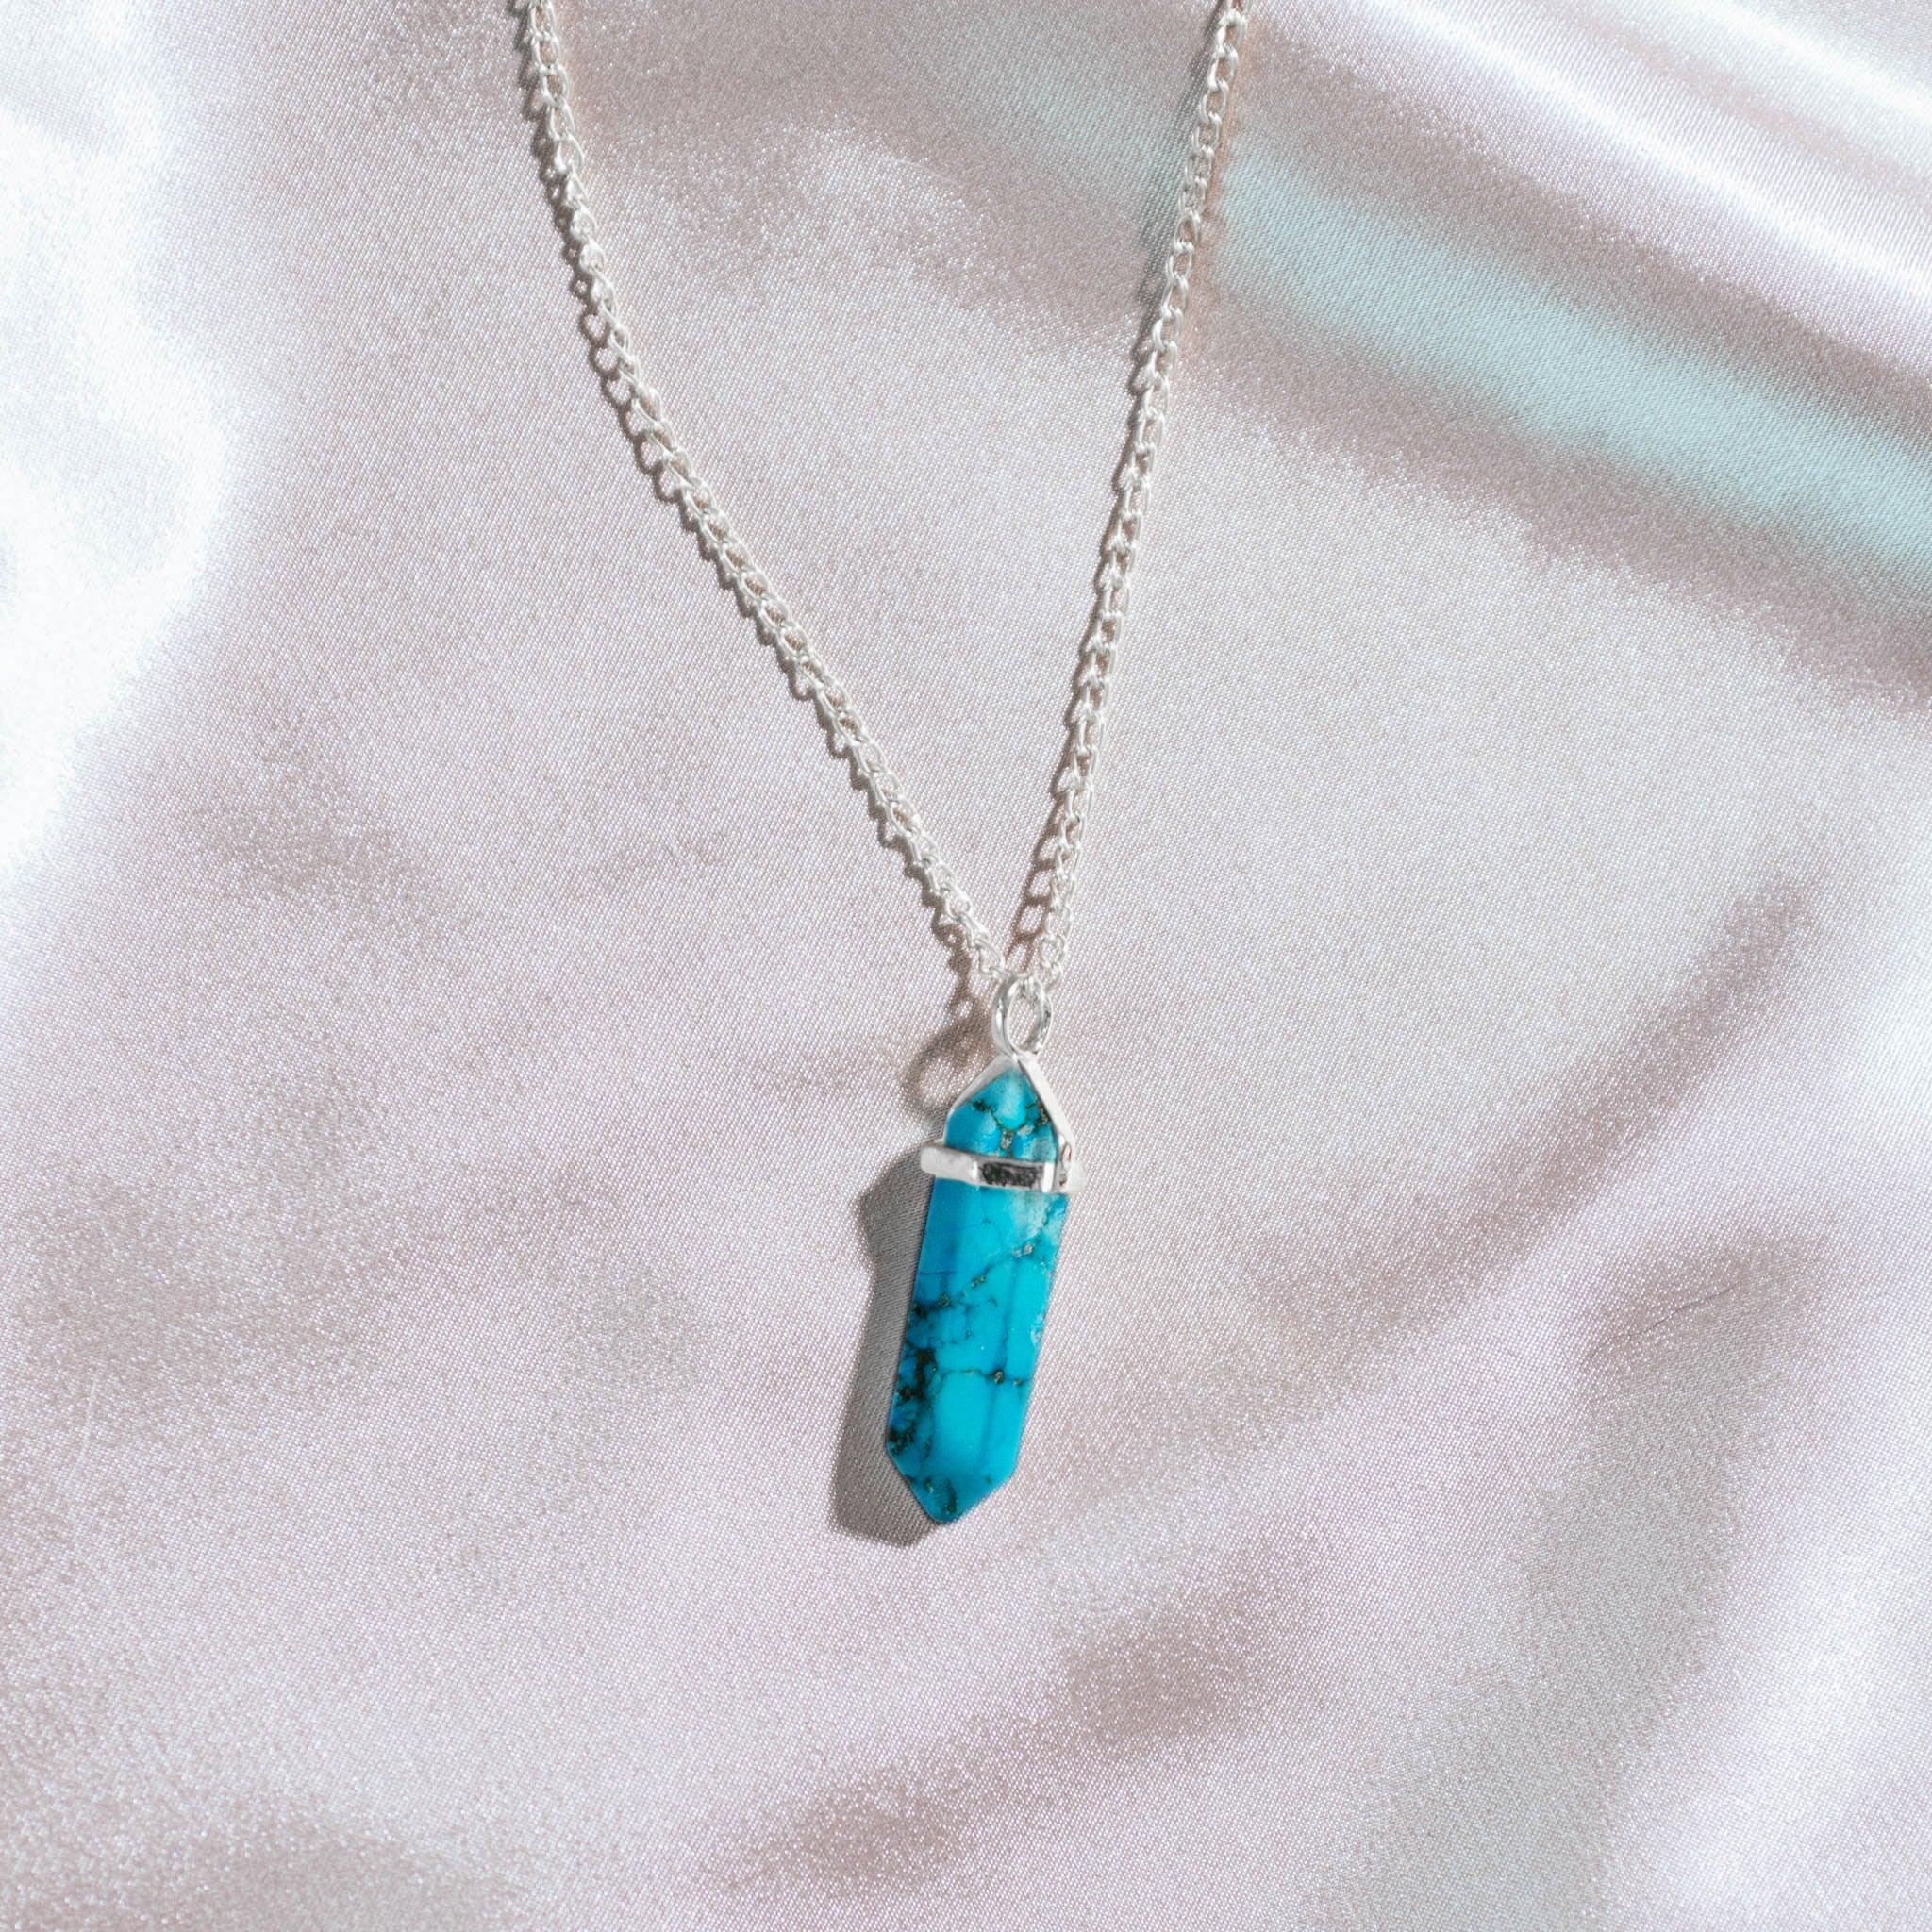 Turquoise Stone Necklace - Time's Reel